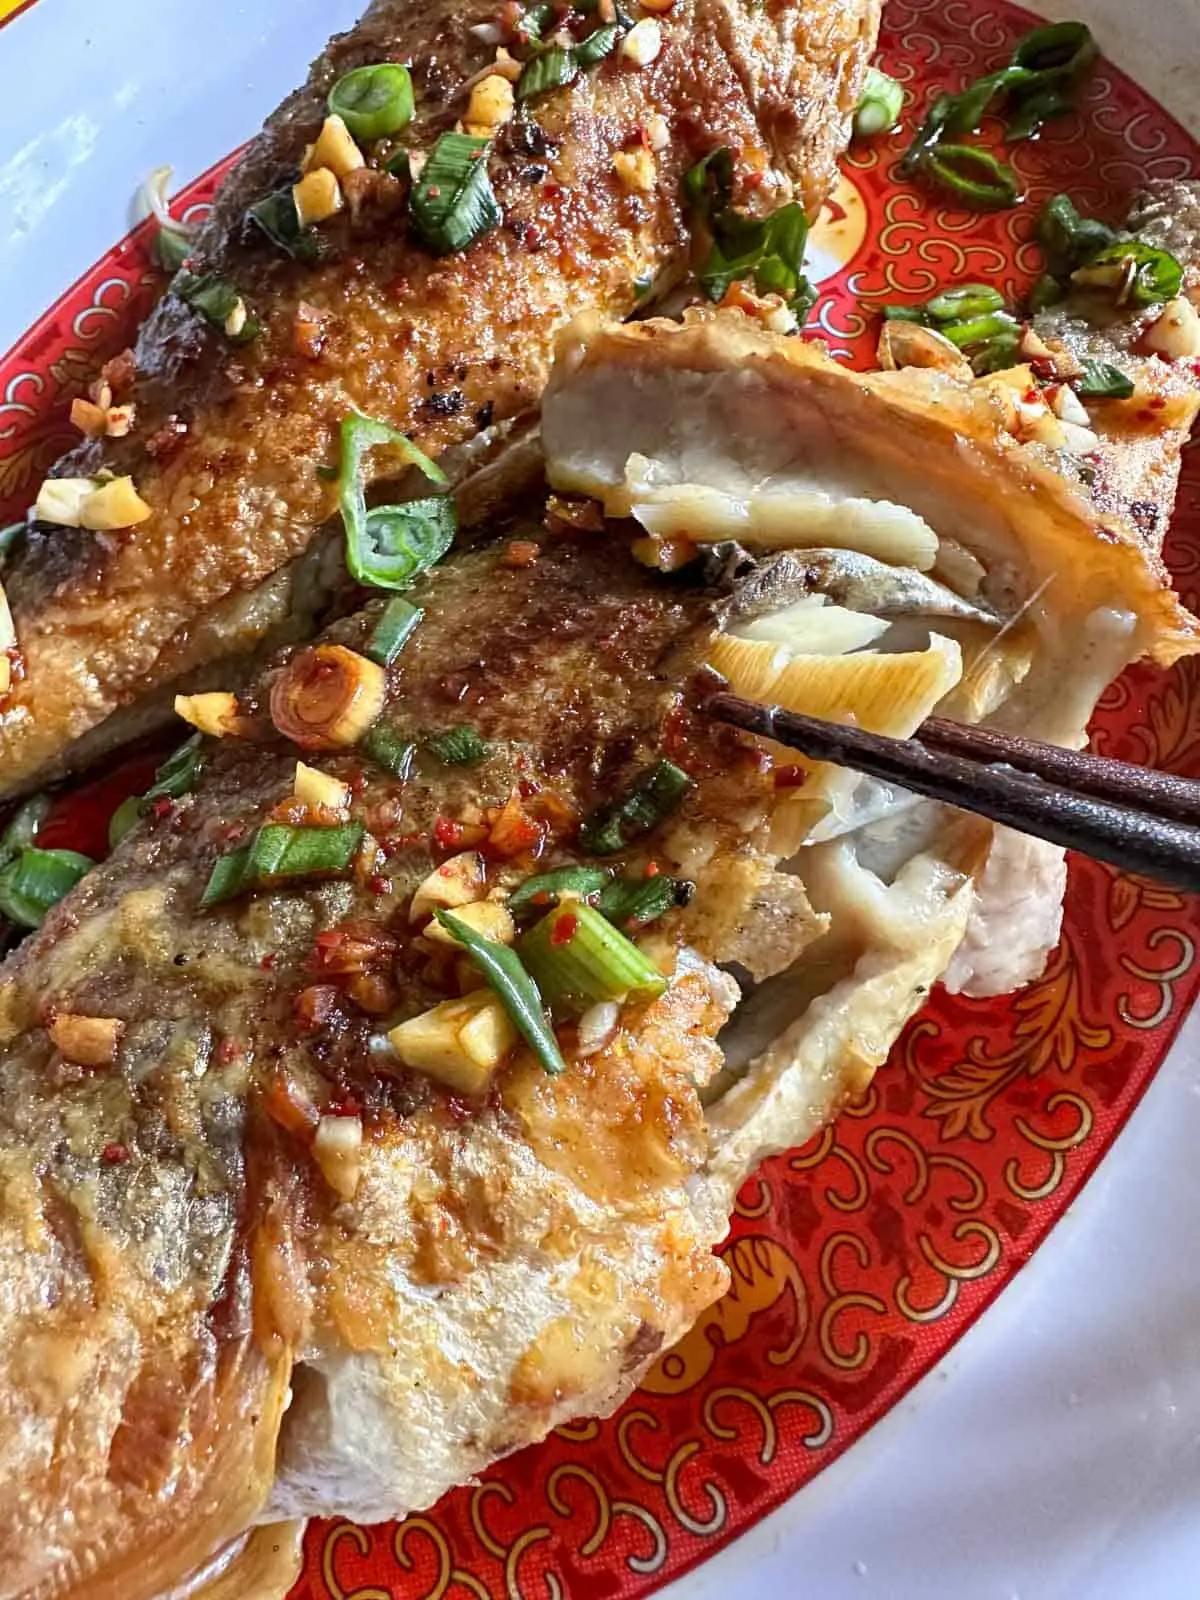 Two pan fried corvina fish on a patterned plate. The fish has been drizzled with a soy based sauce and garnished with sliced green onions. There is a pair of chopsticks picking up some of the flesh of the fish.